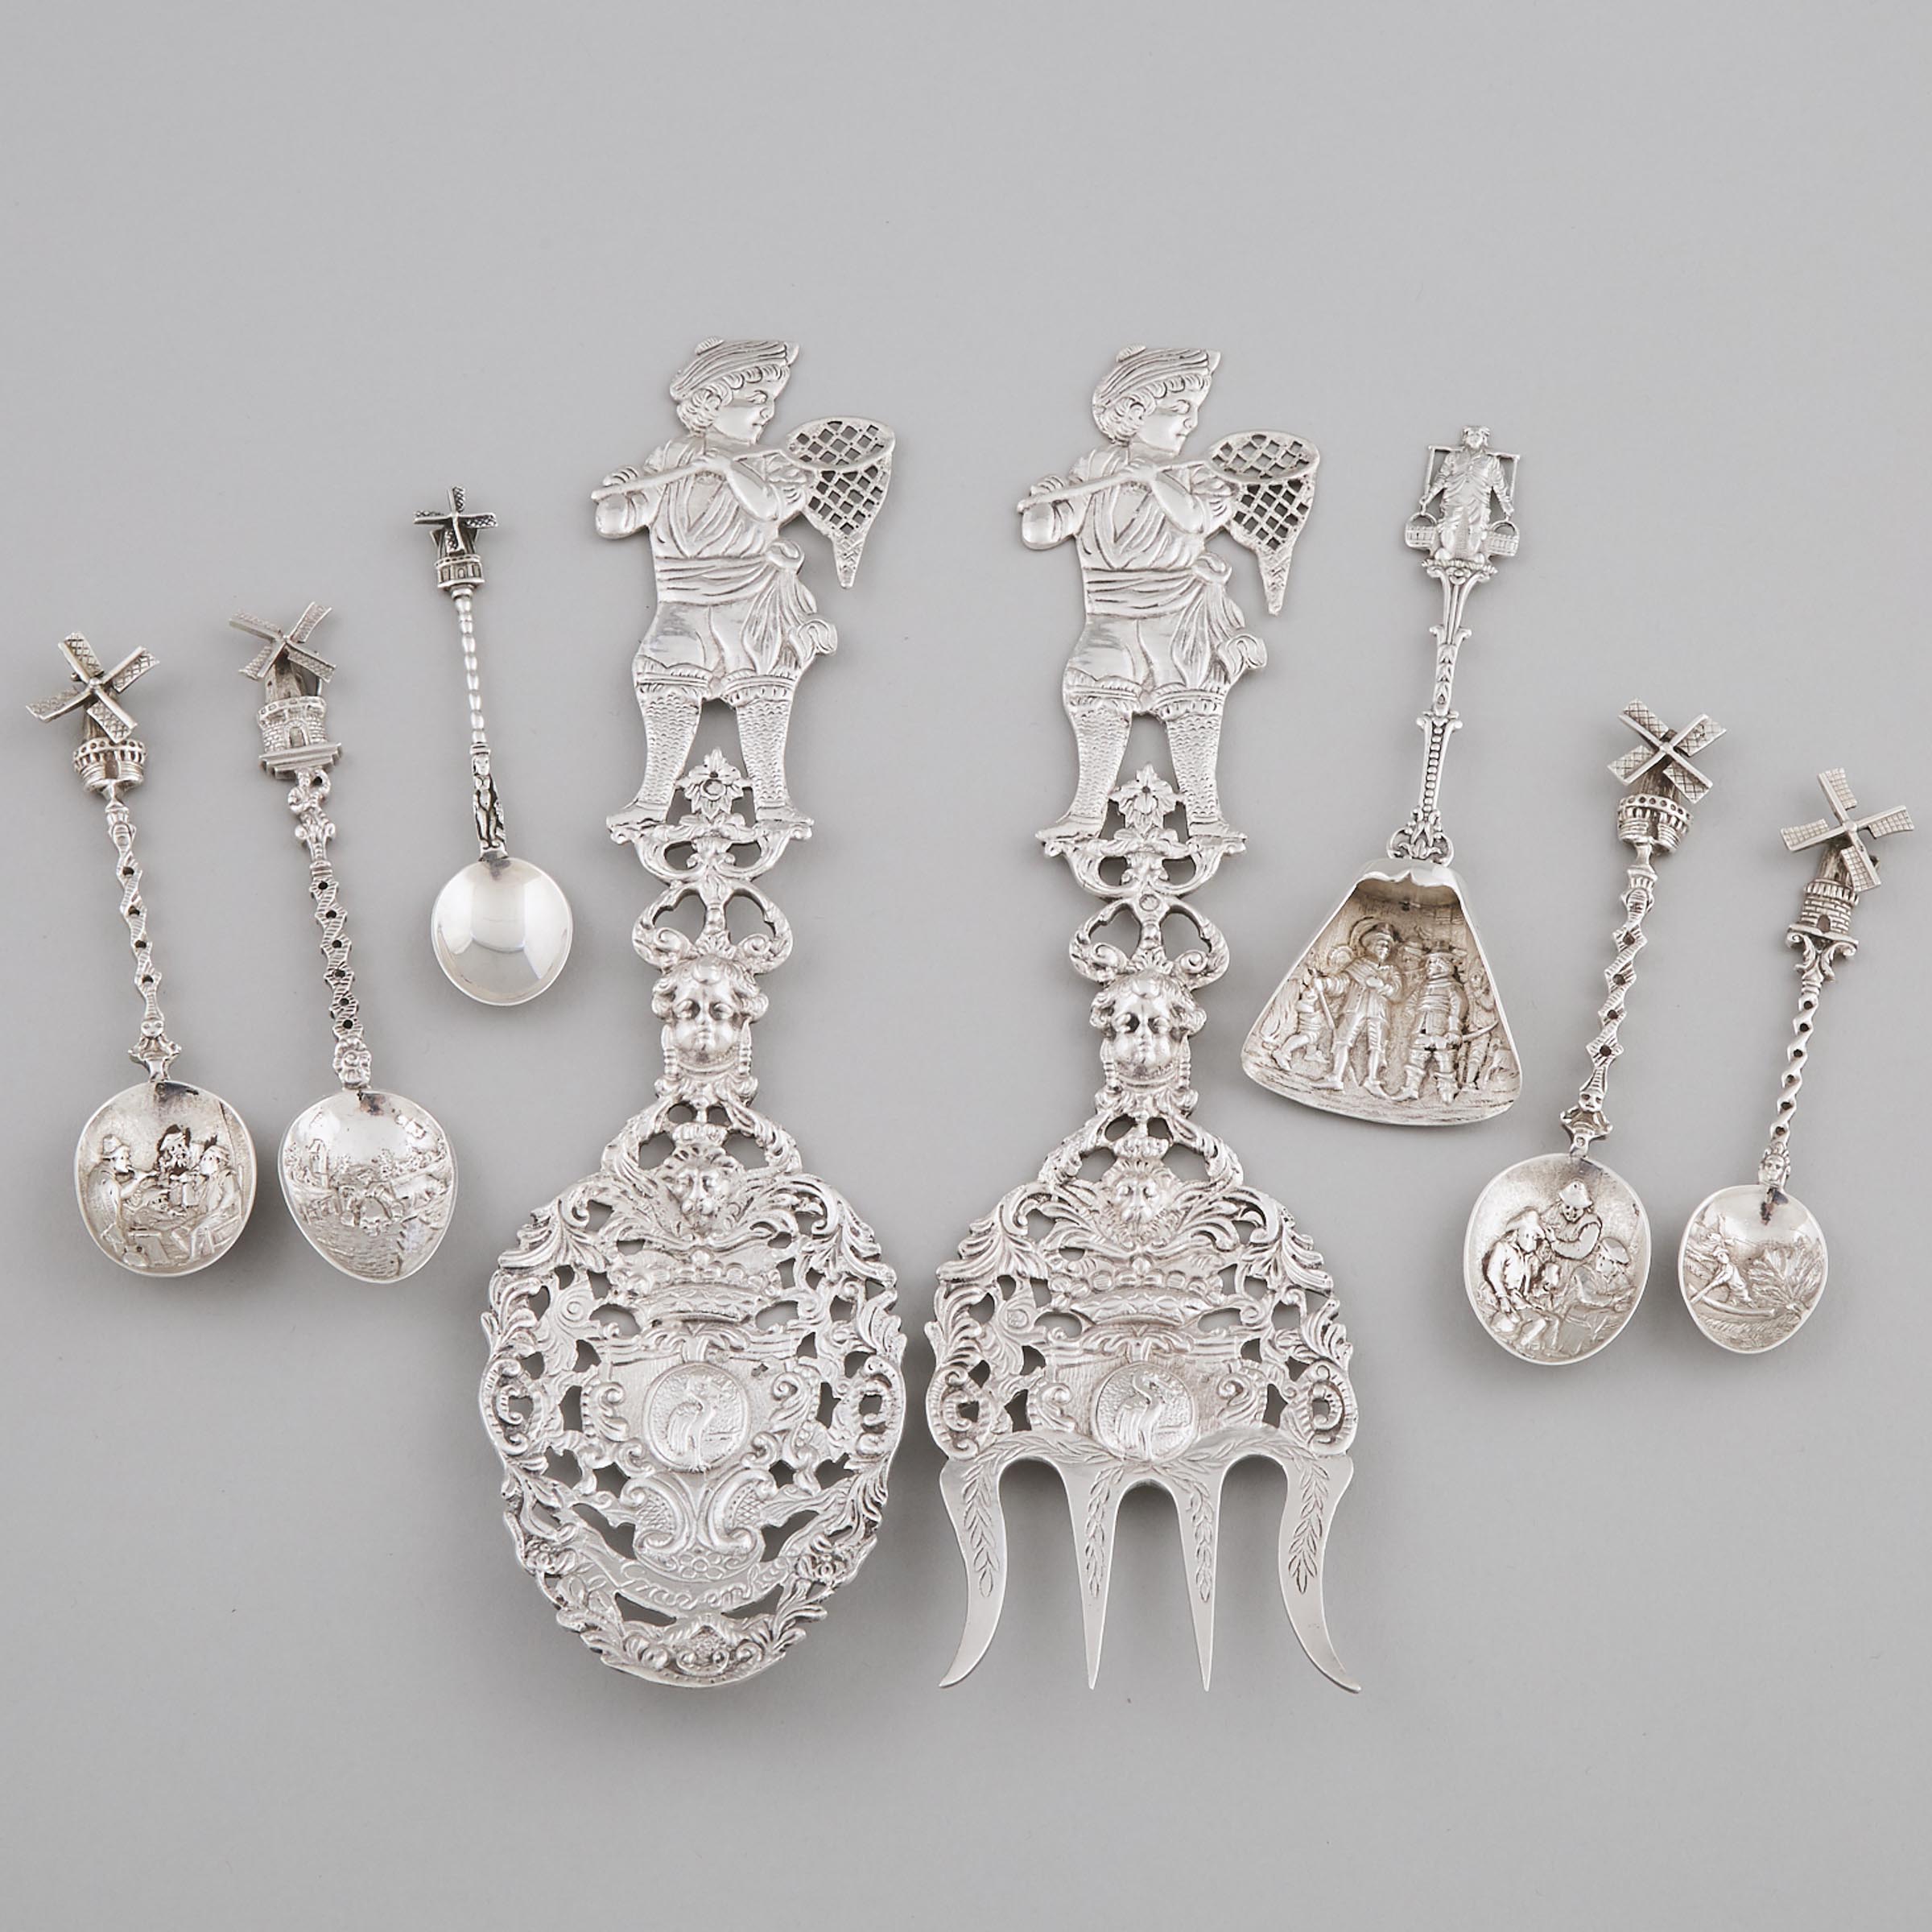 Group of Dutch Silver Novelty Flatware, 20th century